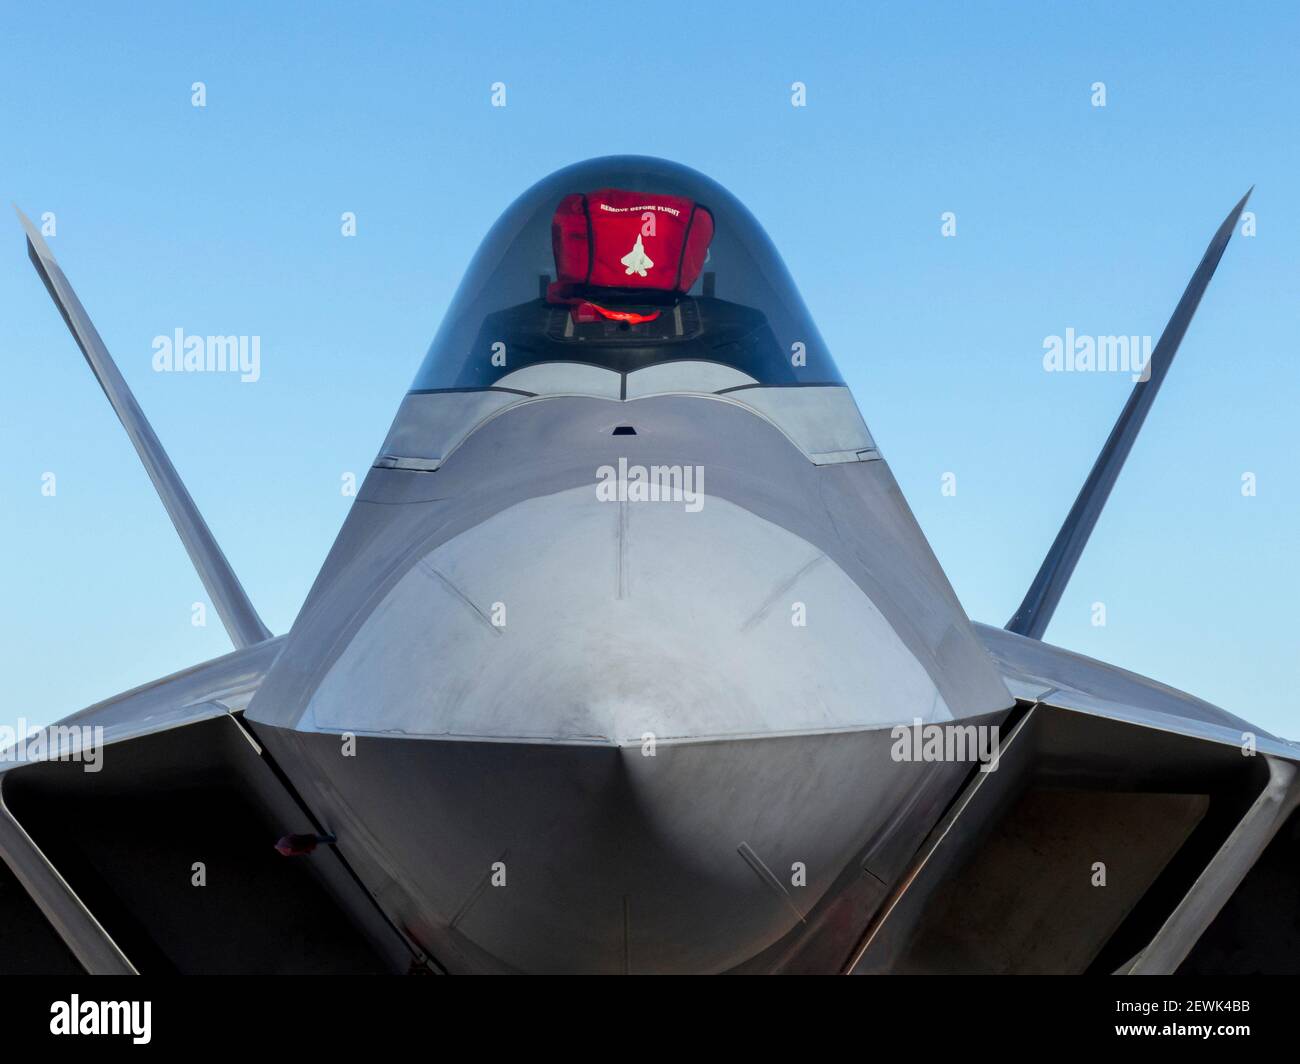 The Lockheed Martin/Boeing F-22 Raptor is a single-seat, twin-engine fifth-generation supermaneuverable fighter aircraft that uses stealth Stock Photo